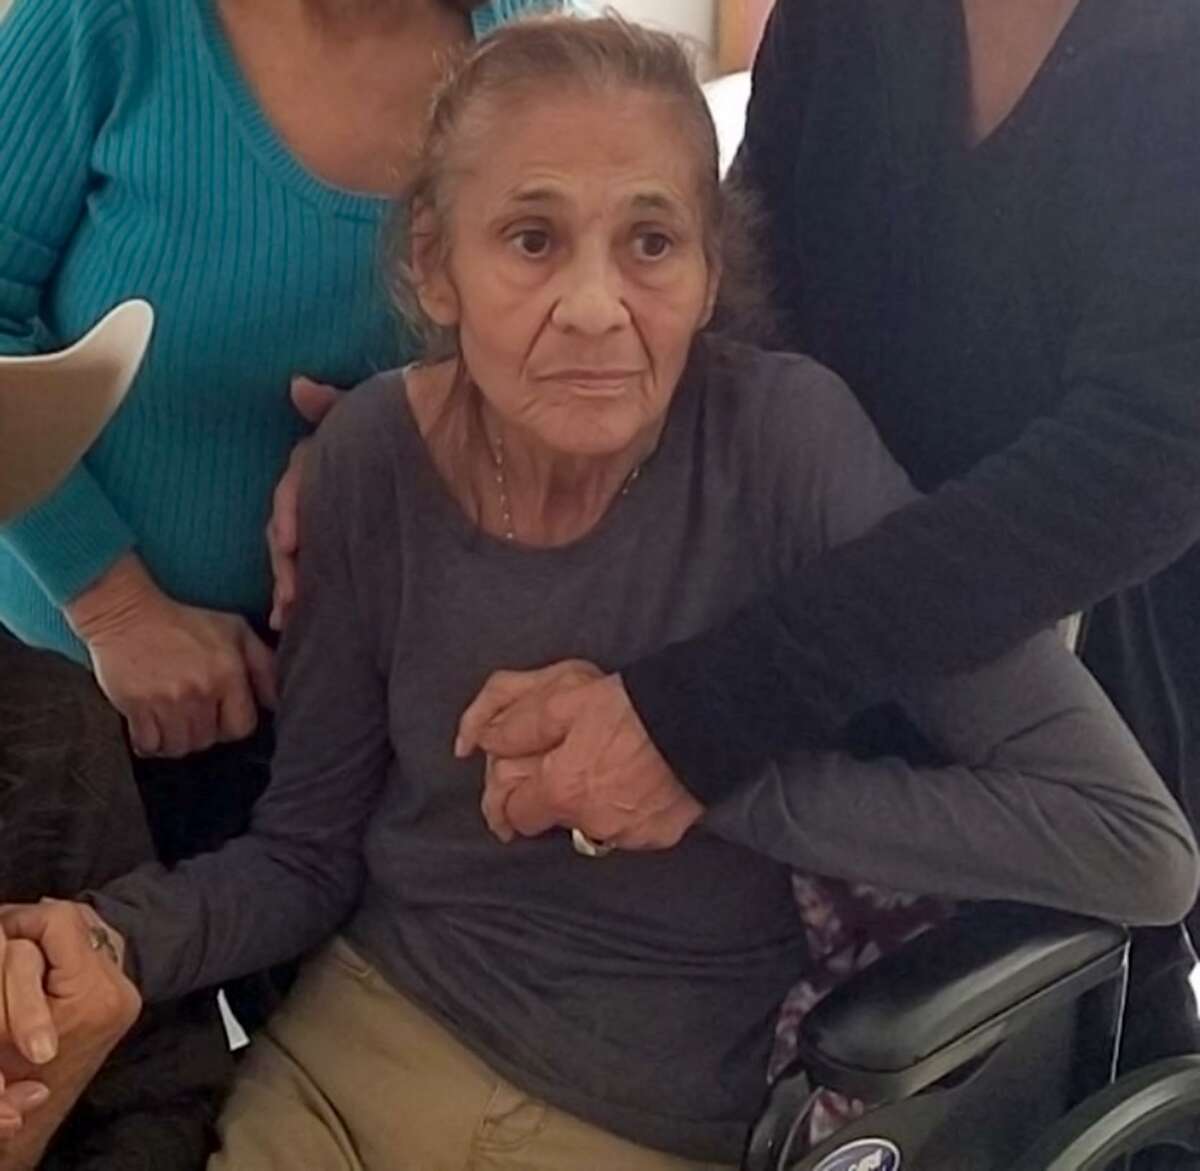 Family members surround Dolores Gutierrez DeLeon in this undated photo. DeLeon died April 23 at the age of 78. Her family has filed a lawsuit against Castillo Mission Funeral Home, alleging DeLeon’s body went missing. The family’s attorney said Wednesday it appears she was cremated under the name of another woman who died hte same day.